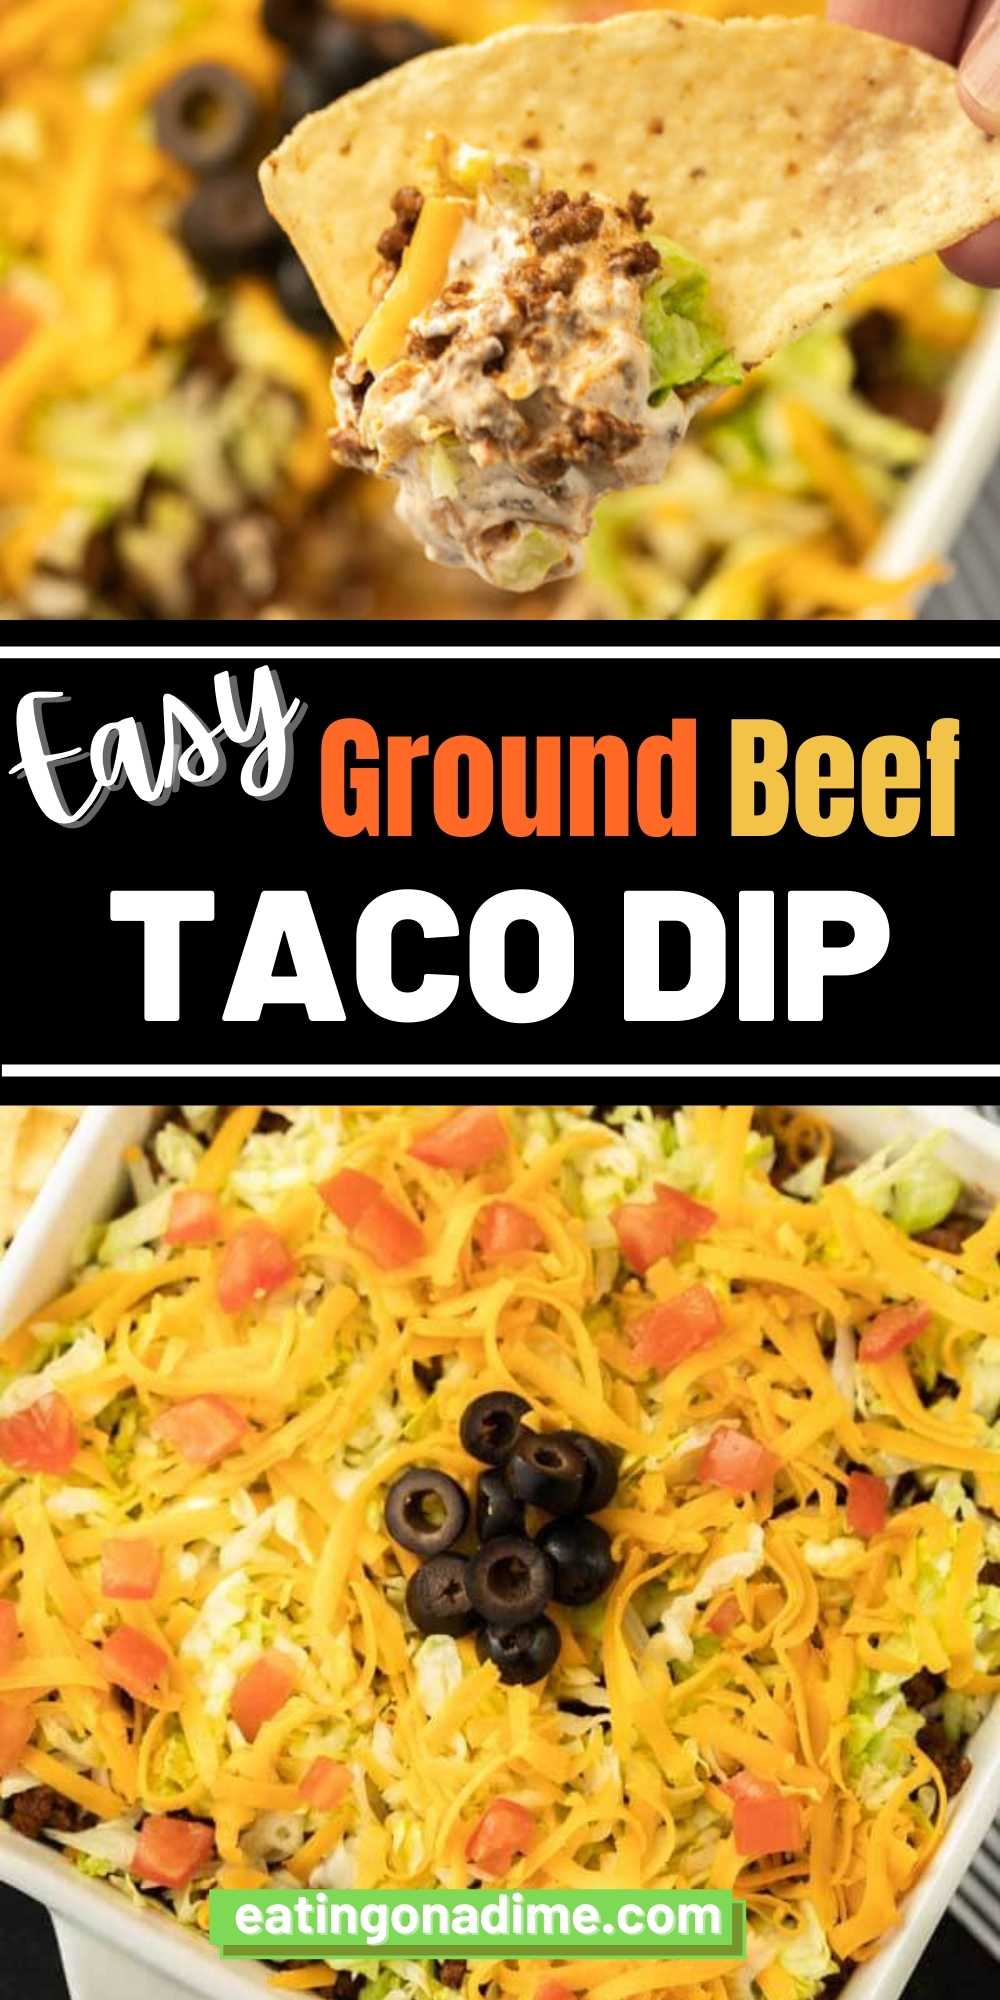 Creamy, cheesy, delicious ground beef taco dip is perfect for a party and an easy family dinner. This beef taco dip recipe is made with ground beef, sour cream, cream cheese and your favorite veggies!. Everyone will love this easy taco dip recipe.  #eatingonadime #diprecipes #groundbeefrecipes #tacodiprecipes 
